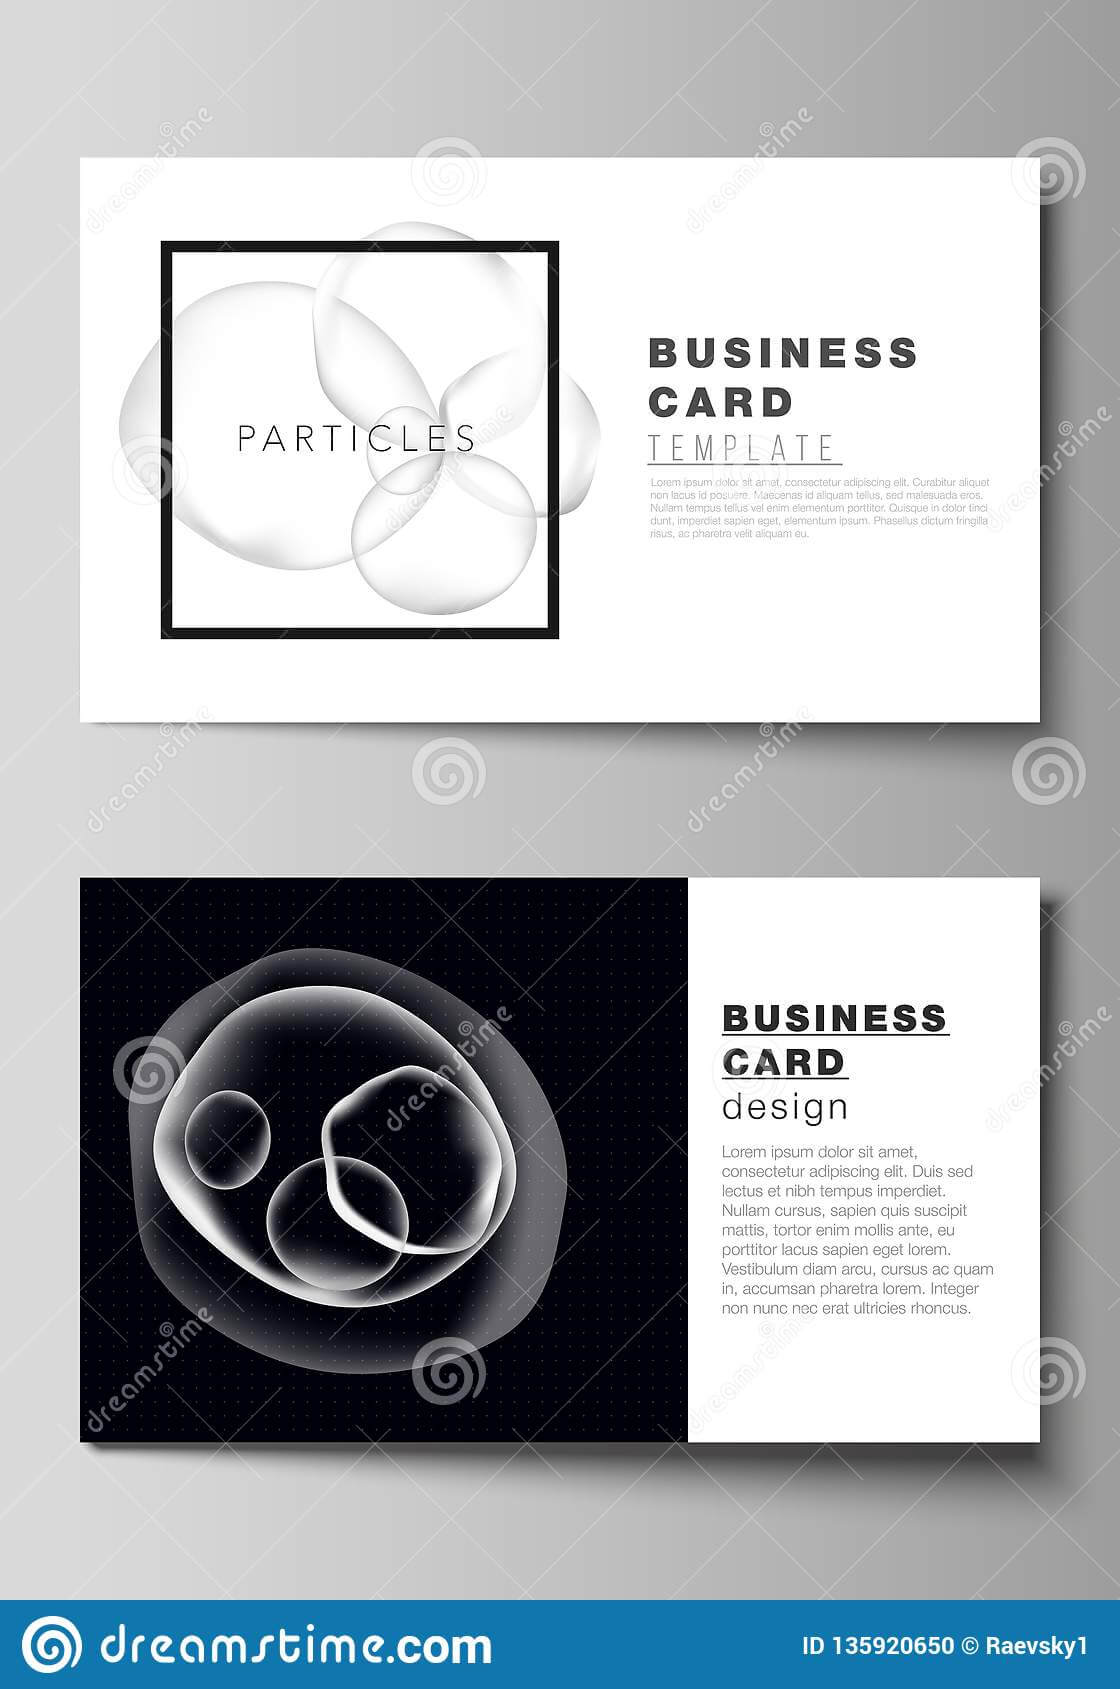 The Minimalistic Editable Vector Layout Of Two Creative Throughout Medical Business Cards Templates Free